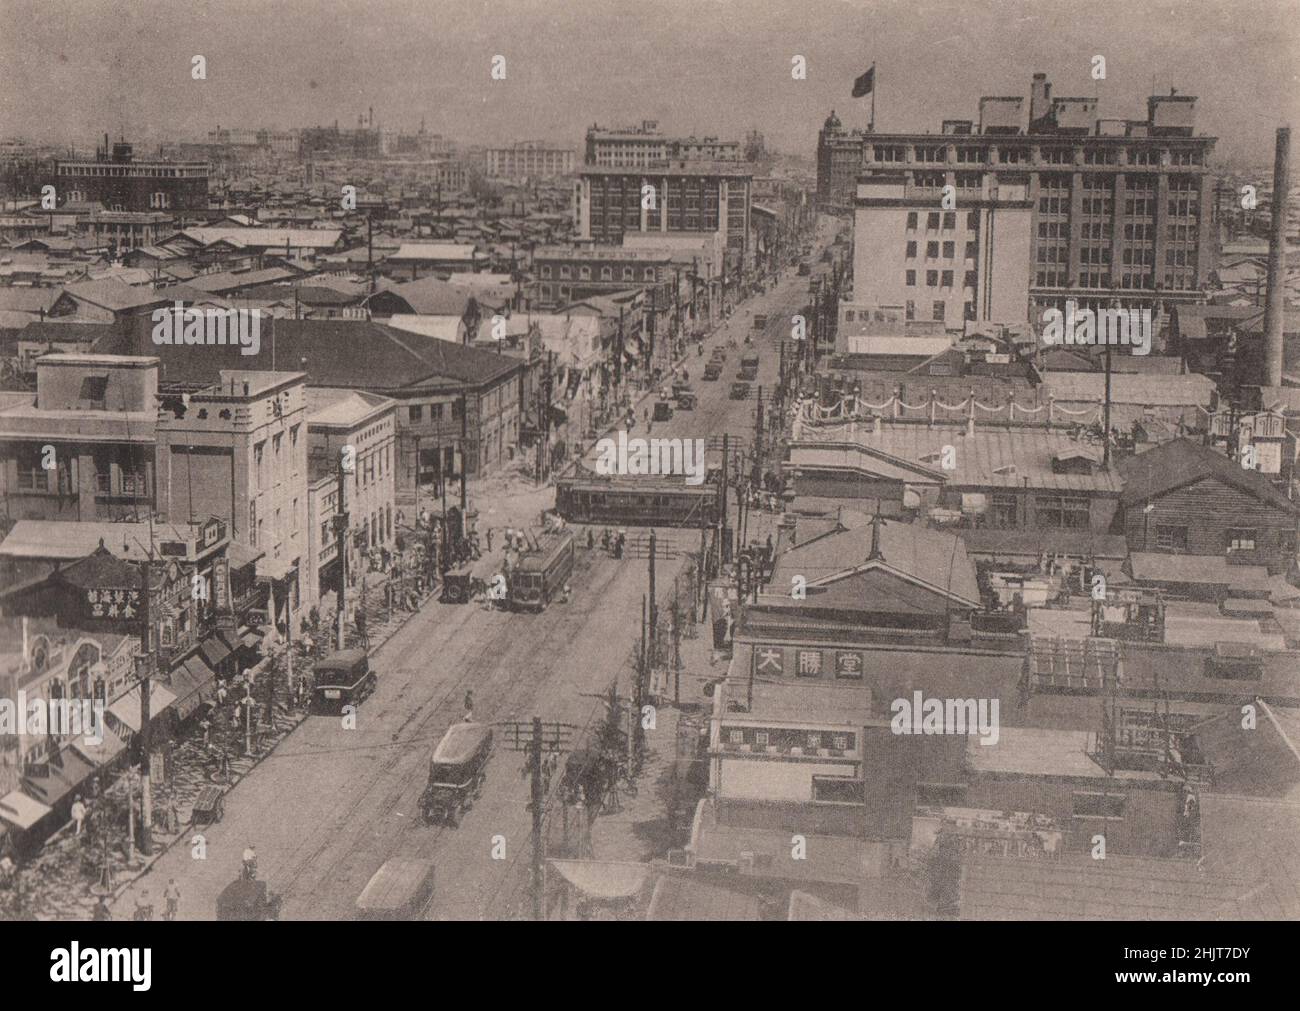 Japan Earthquake 1923: The new Gina miser from the ruins-A partial view of the street seen from the upper story of the Matsuzakaya buildings Stock Photo